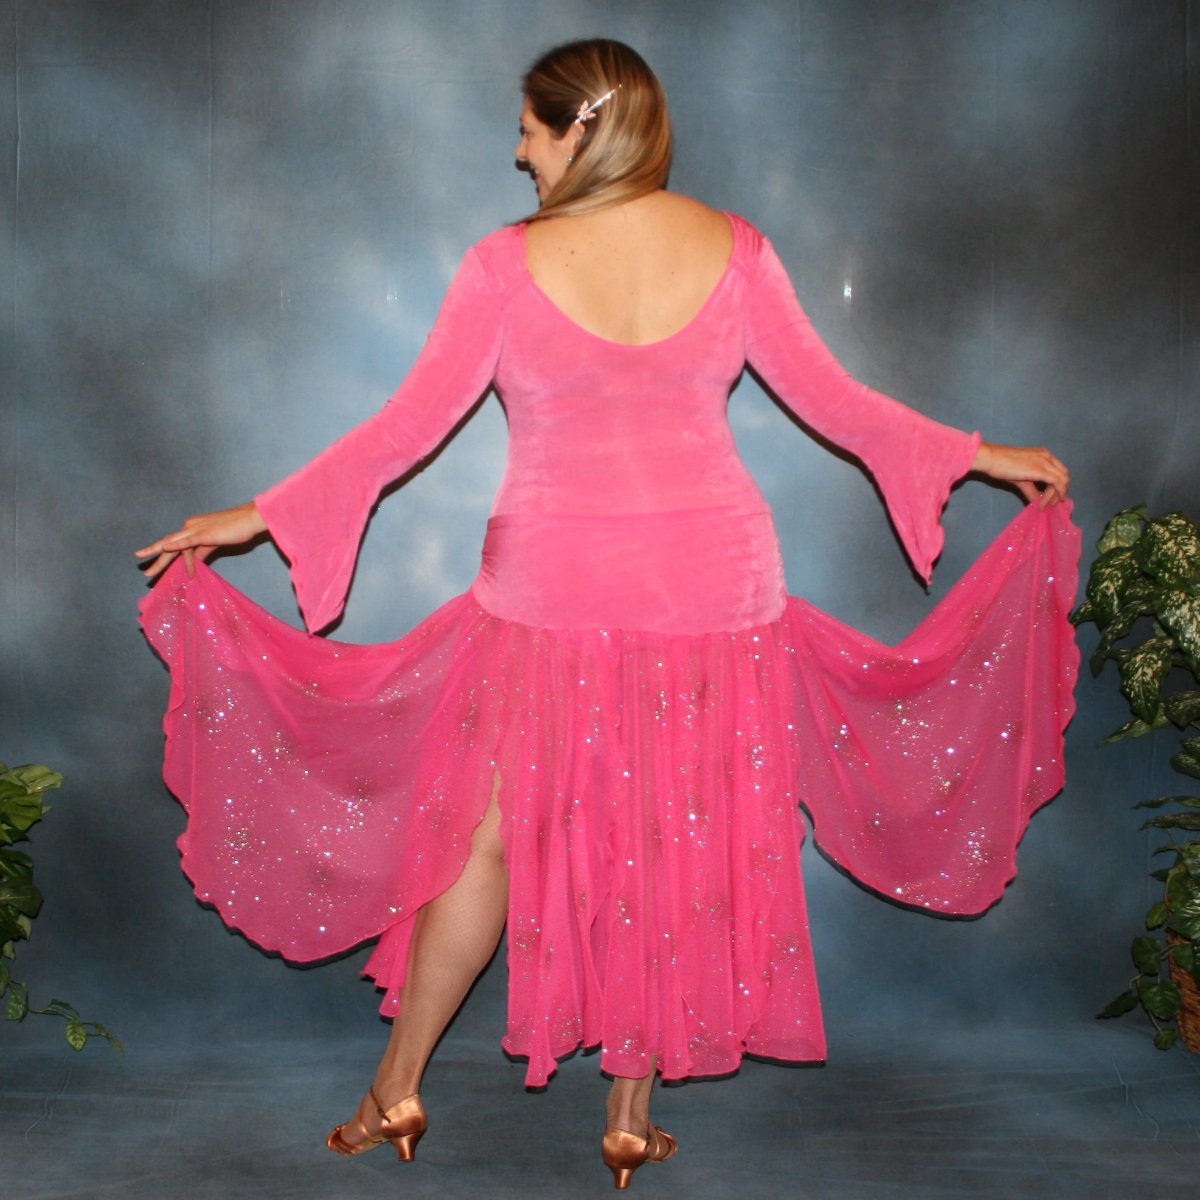 Crystal's Creations back view of Bubble gum pink solid slinky body suit with long flaired sleeves includes 3 ballroom skirts, one for smooth with yards of glitter chiffon, a 2nd, with oodles of print chiffon flounces, which is great for rumba, bolero or tango & a 3rd of solid slinky to wear for Latin/rhythm dancing